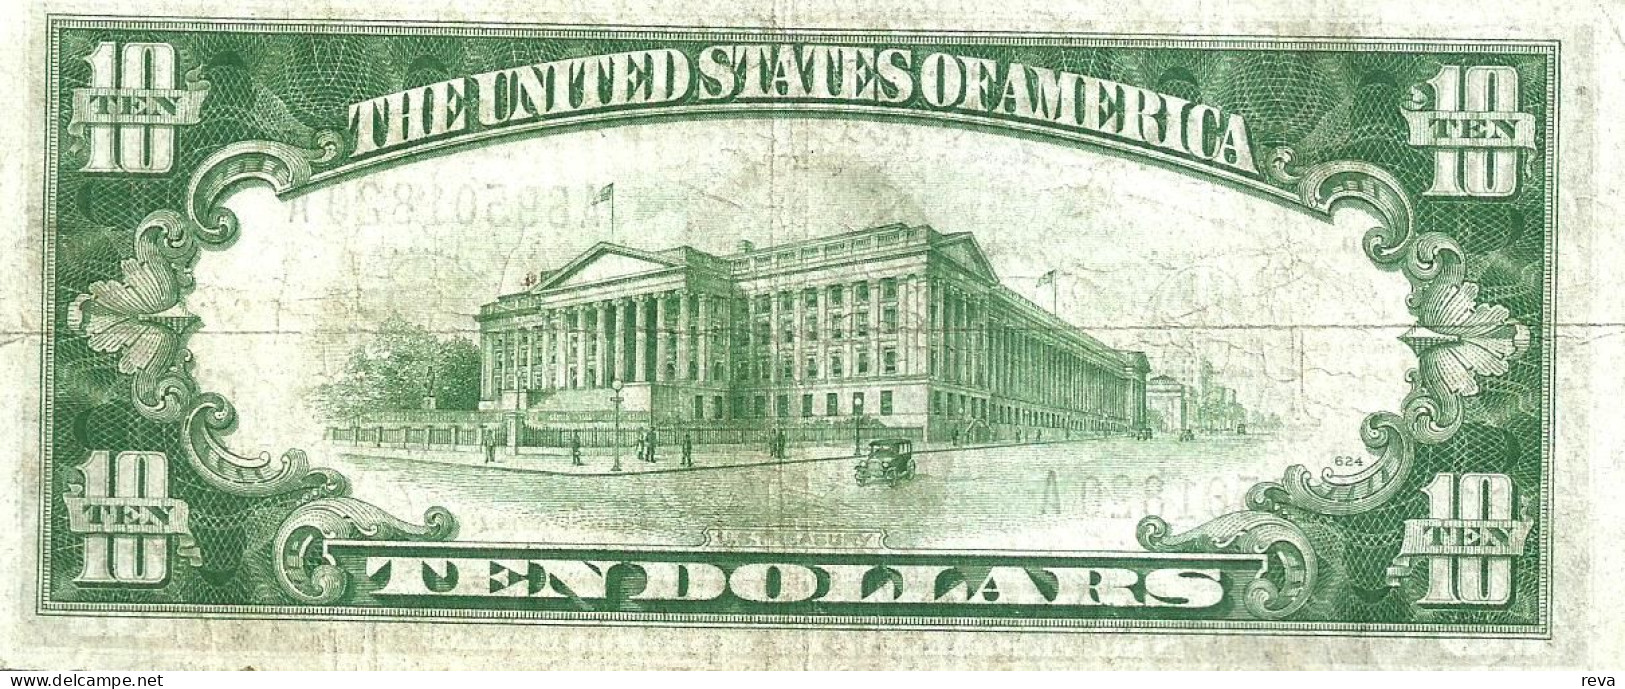 USA UNITED STATES $10 SILVER CERTIFICATE BLACK SEAL SERIES 1934 VF P415a SCARCE READ DESCRIPTION CAREFULLY !!! - Certificats D'Argent (1928-1957)